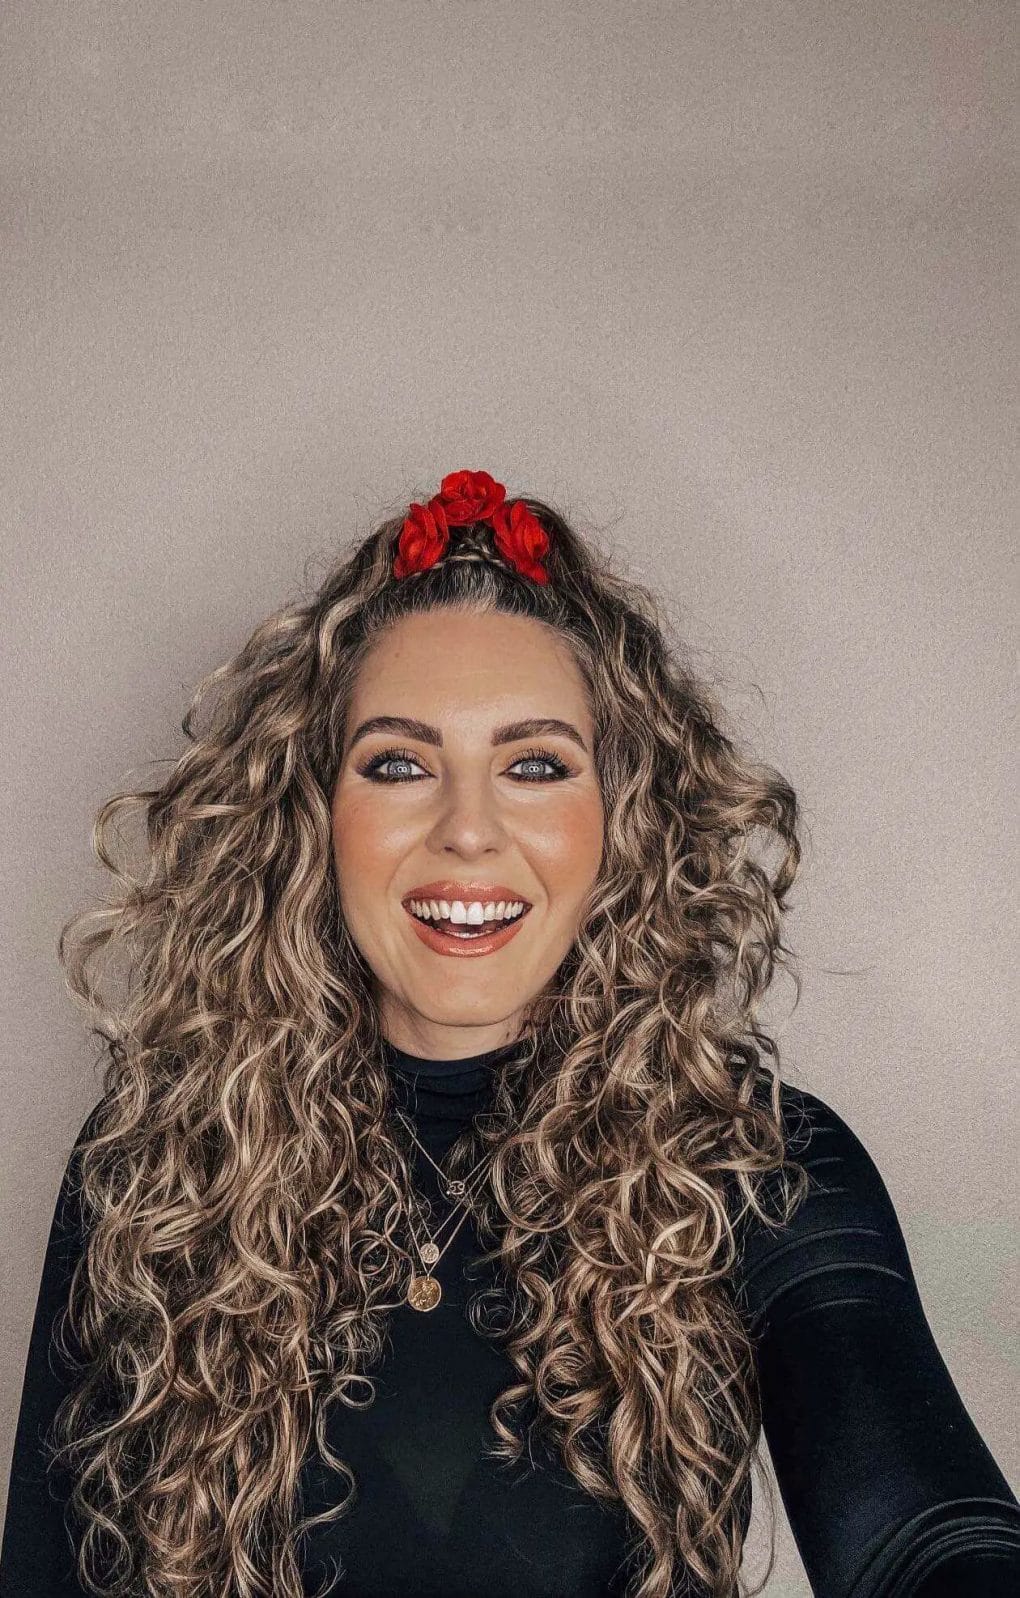 Vibrant red floral headband on top of voluminous curls for a playful birthday look.